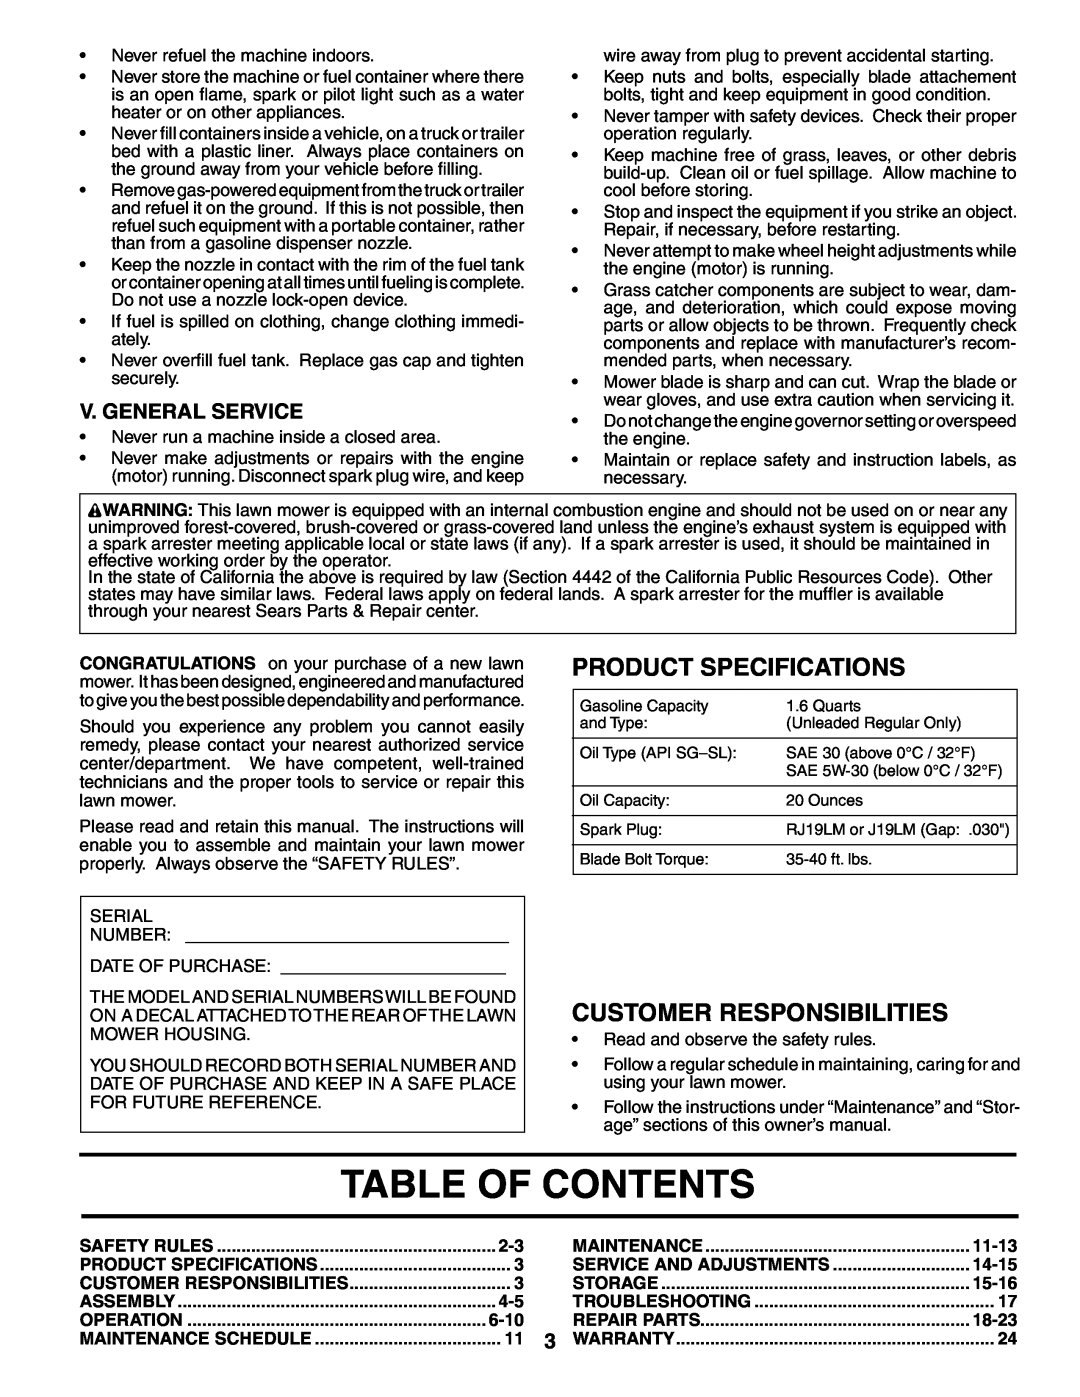 Husqvarna 917.37595 Table Of Contents, Product Specifications, Customer Responsibilities, V. General Service, 6-10, 11-13 